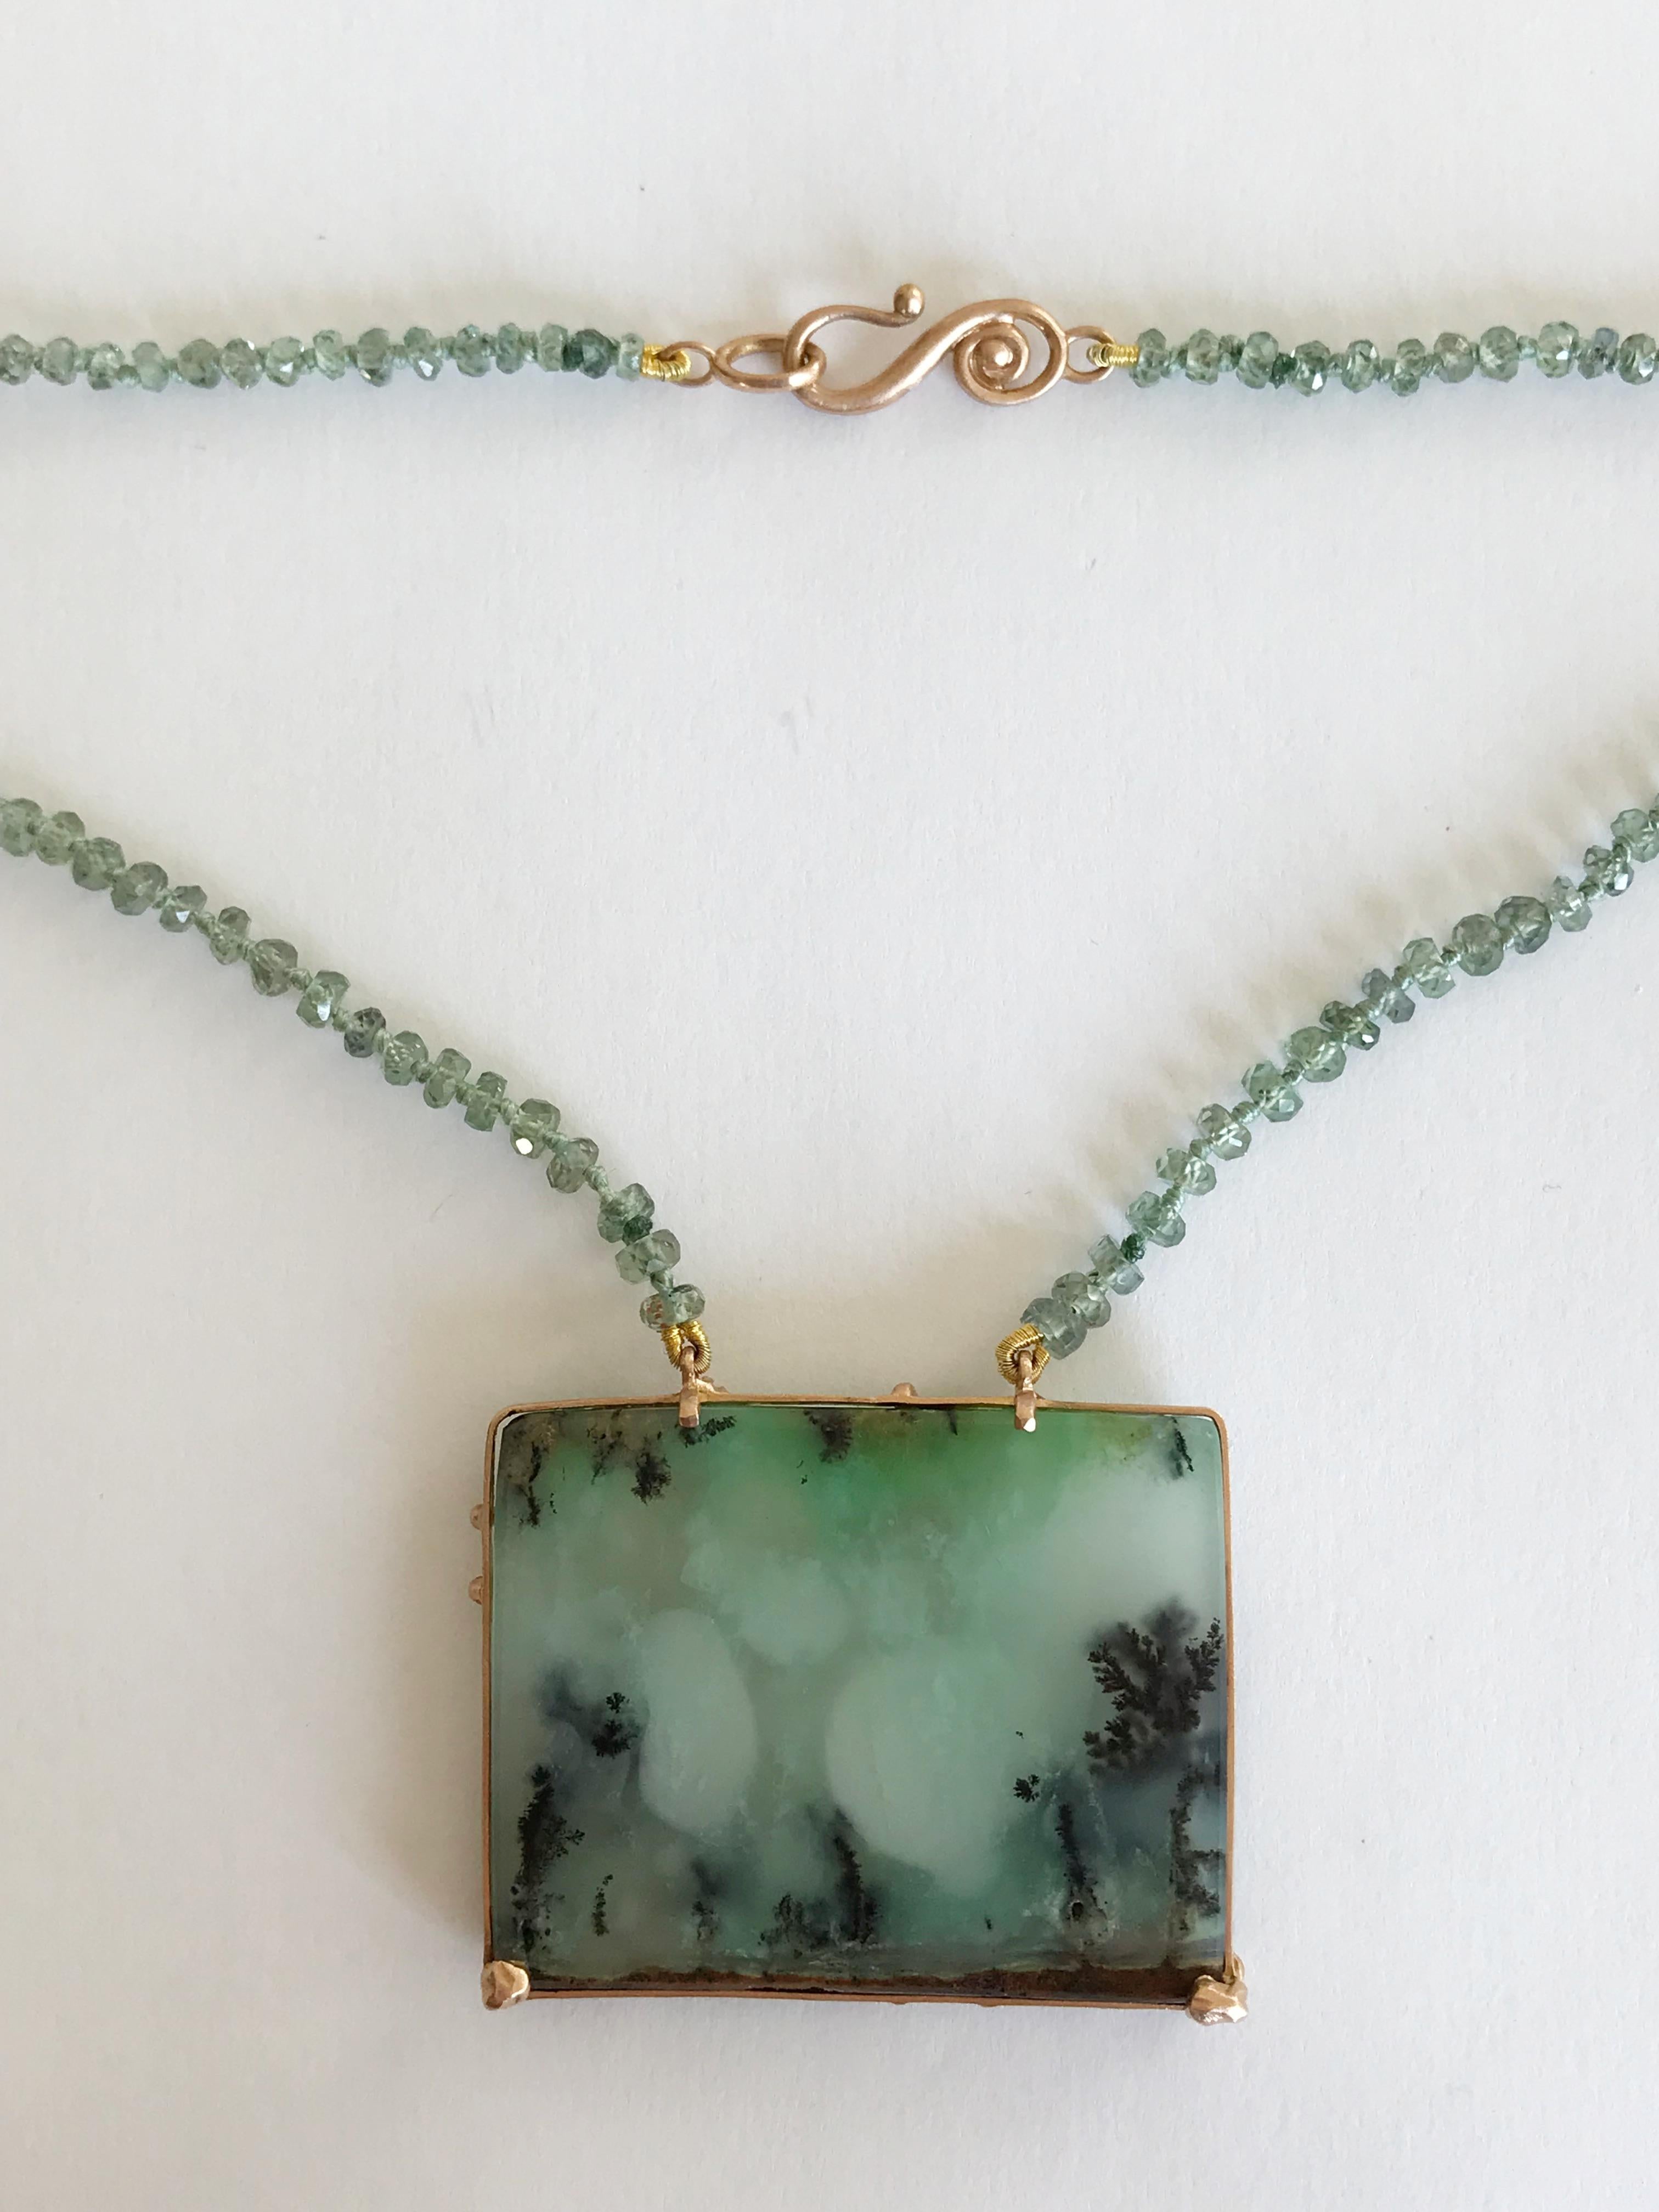 Dalben design necklace composed of a rectangular dendritic chrysoprase , green faceted bead sapphire , 18 k rose gold closure and carved tree bezel setting. 
The necklace length is 26 inch ( 67 cm ).
Bezel dimension: 38,7 x 30 mm
Beads dimension : 